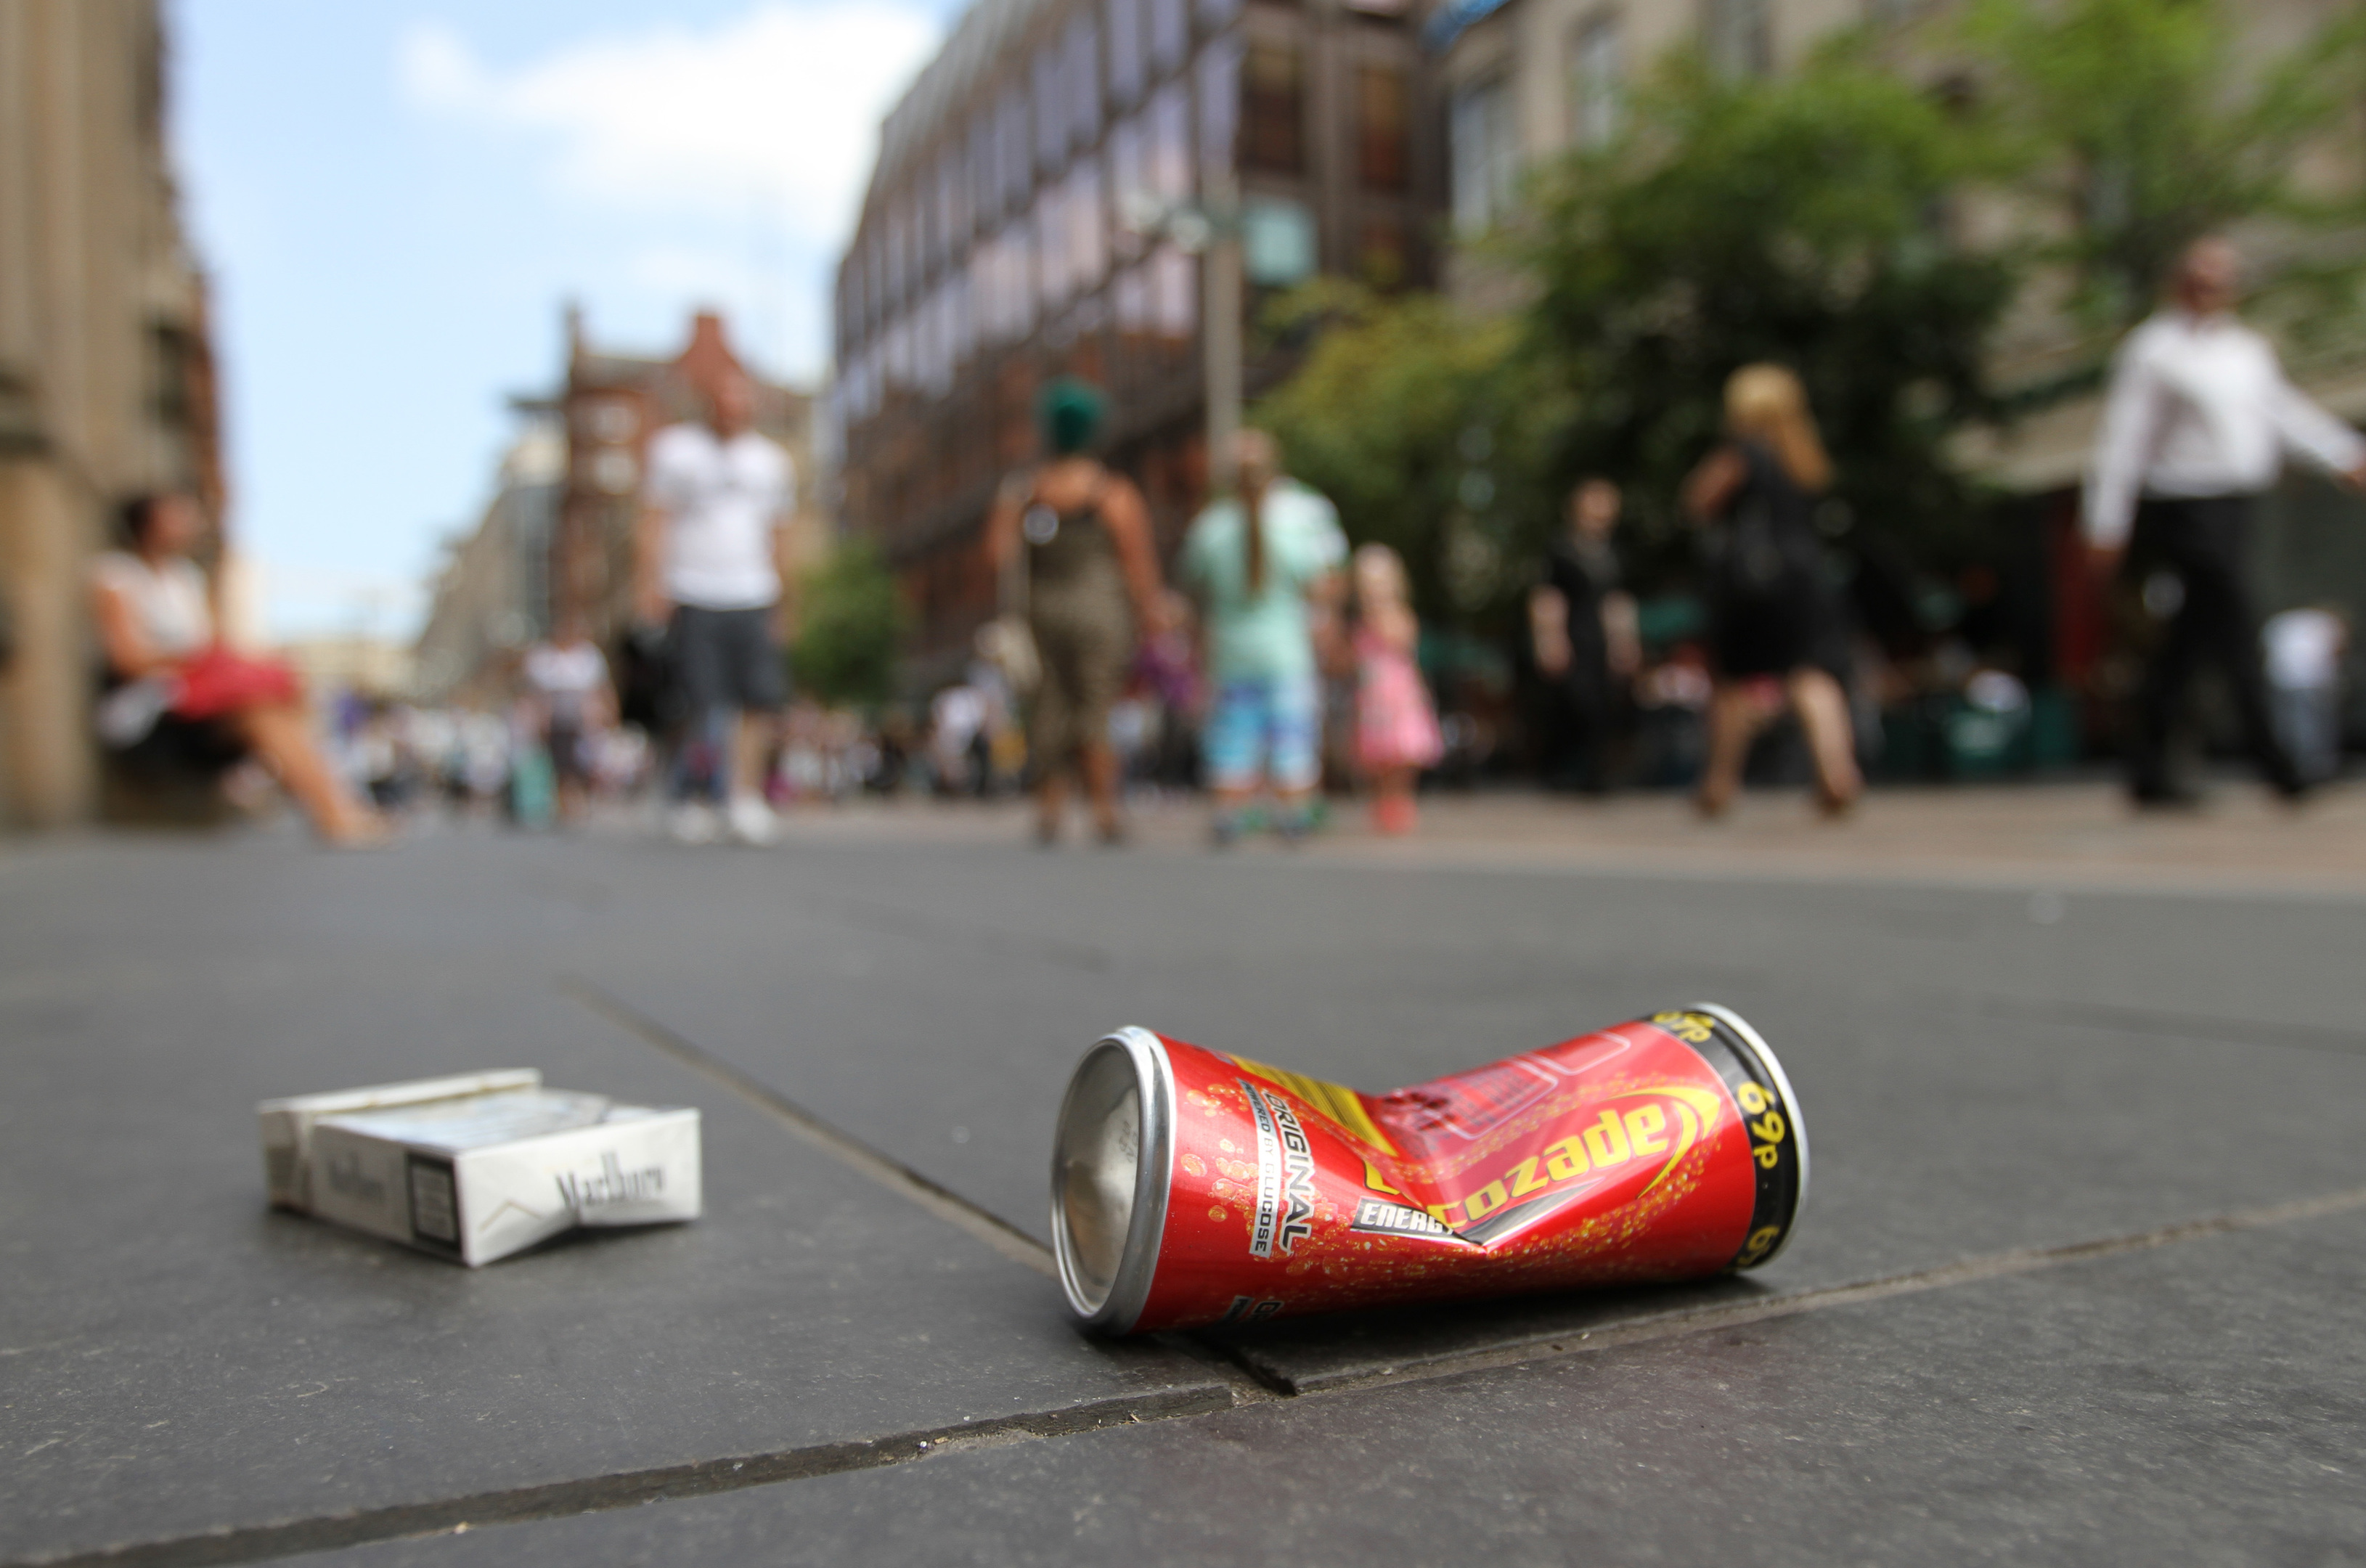 Litter (Andrew Cawley/Sunday Post)